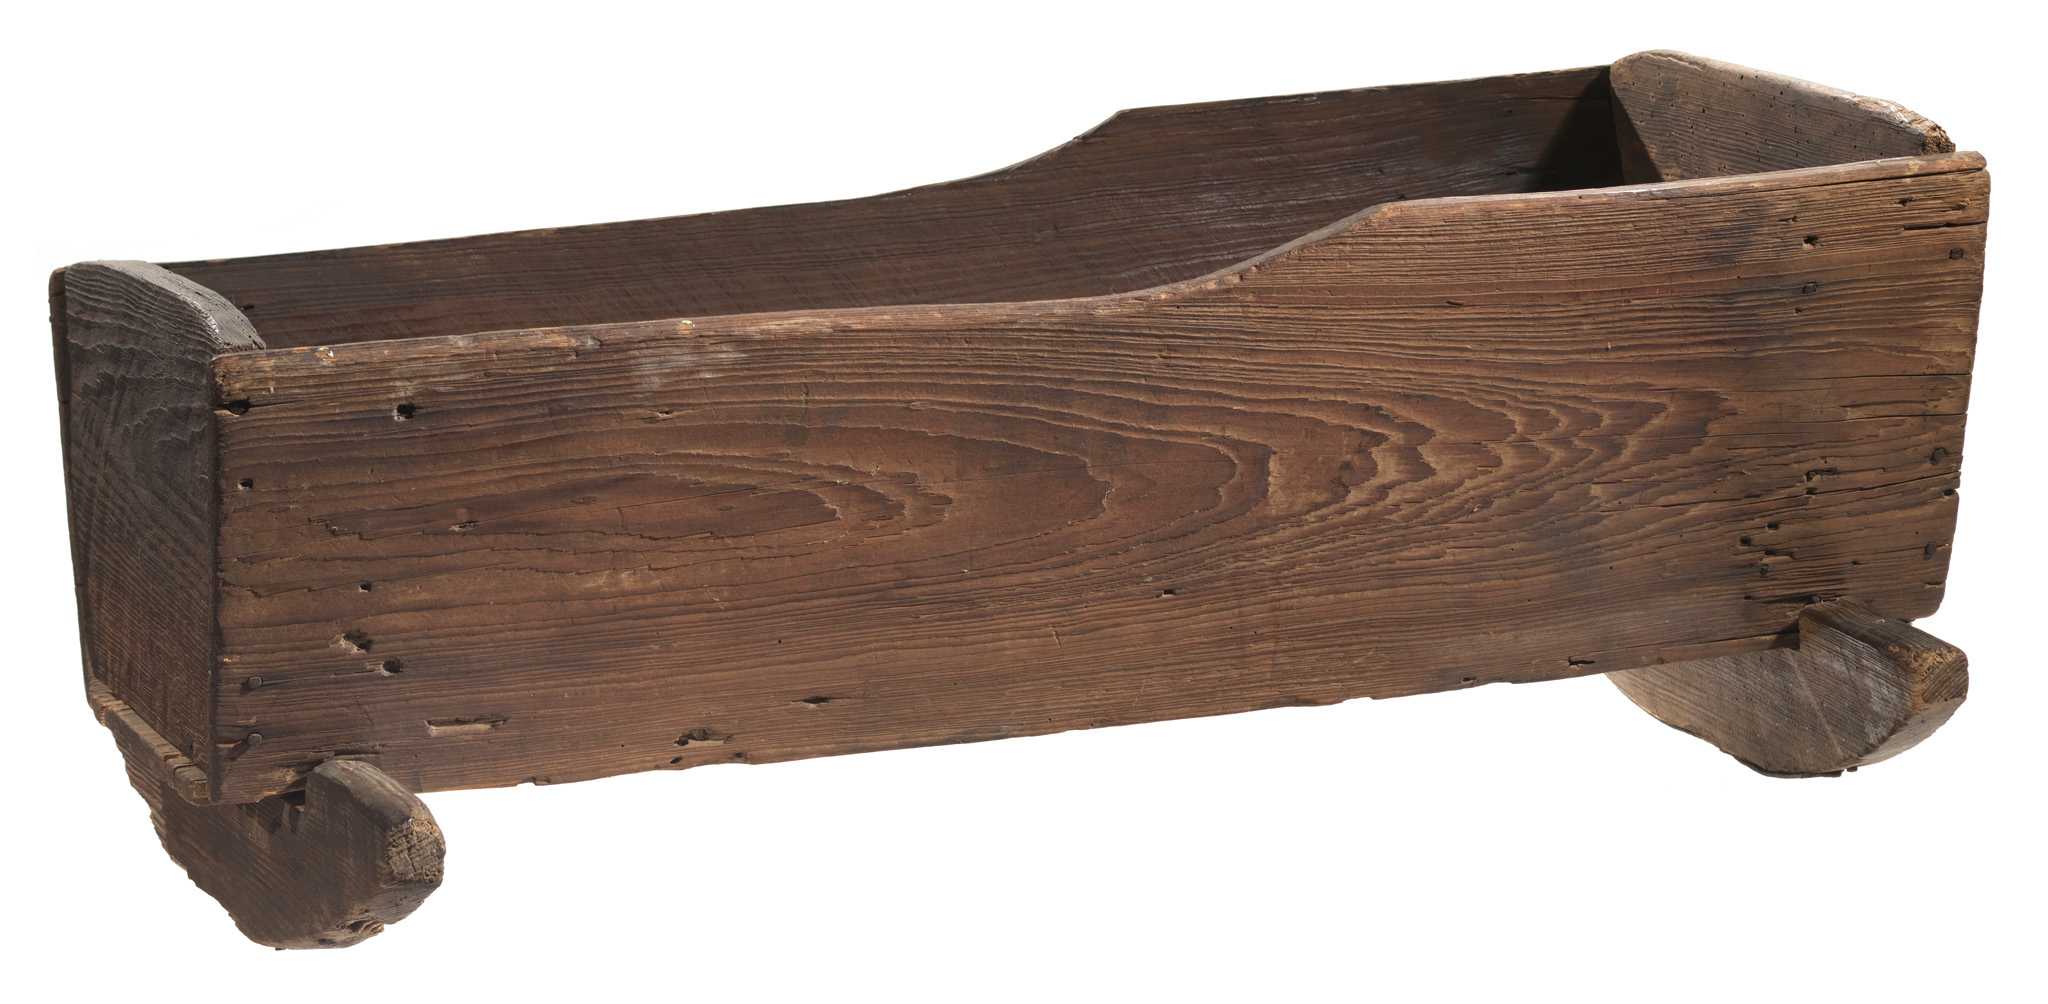 A wooden cradle made by an enslaved person consisting of 5 wooden boards nailed together to form a five-sided bed with open top on 2 rockers. The long sides are sloped, and the short sides have a rounded top edge.